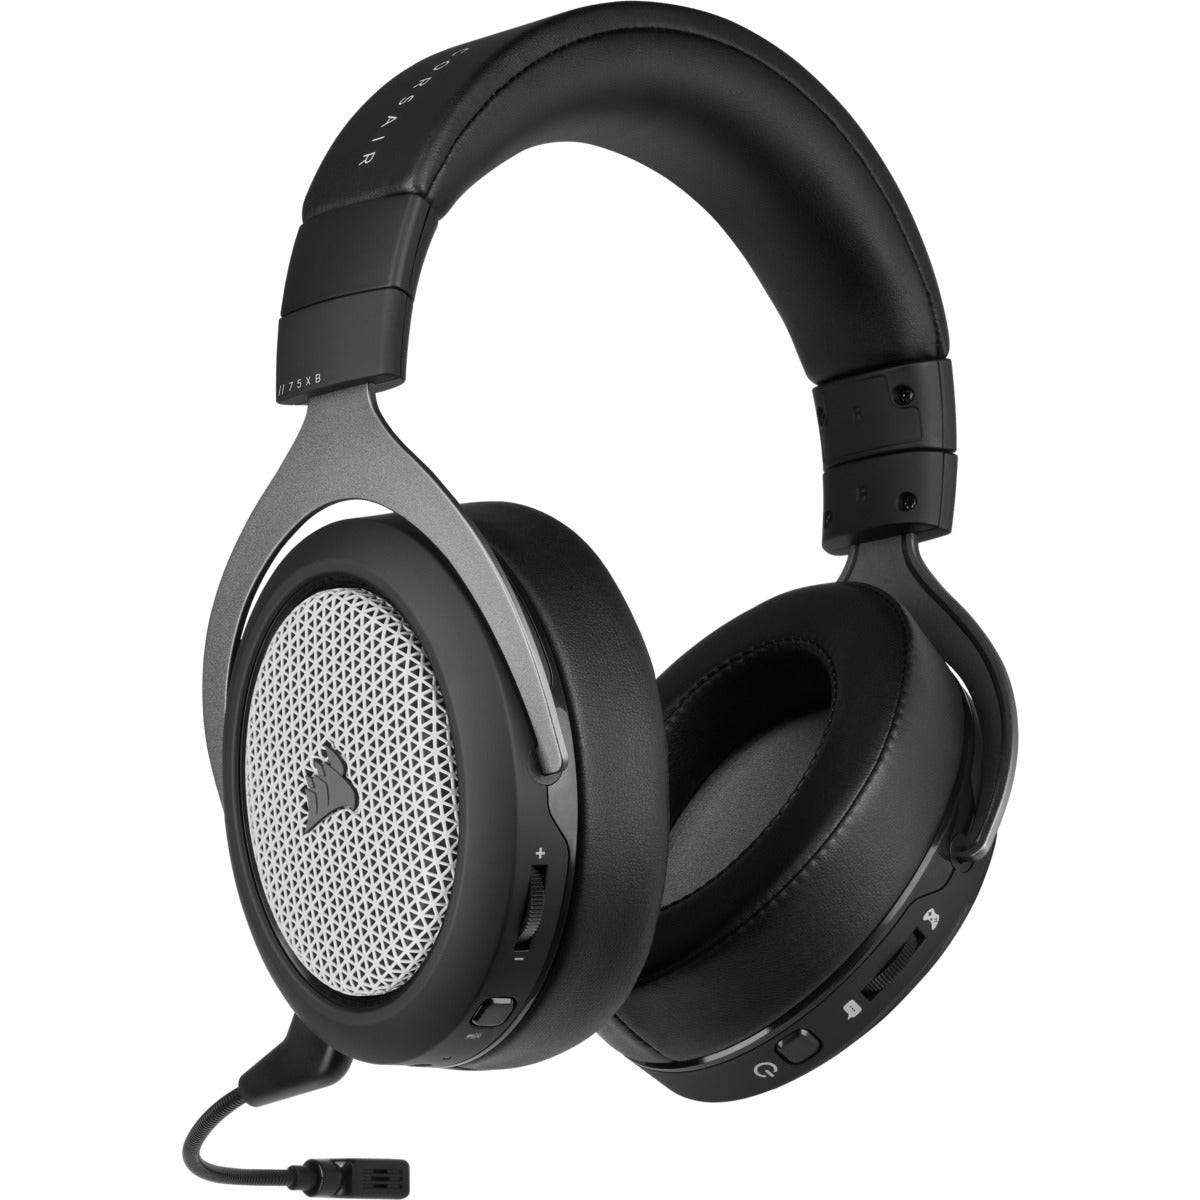 CORSAIR HS75 XB Wireless Gaming Headset Headphones with Dolby Atmos Support, Detachable Unidirectional Noise-Cancelling Microphone, 30ft Max Wireless Range for XBox Series X and XBox One Game Consoles | CA-9011222-AP